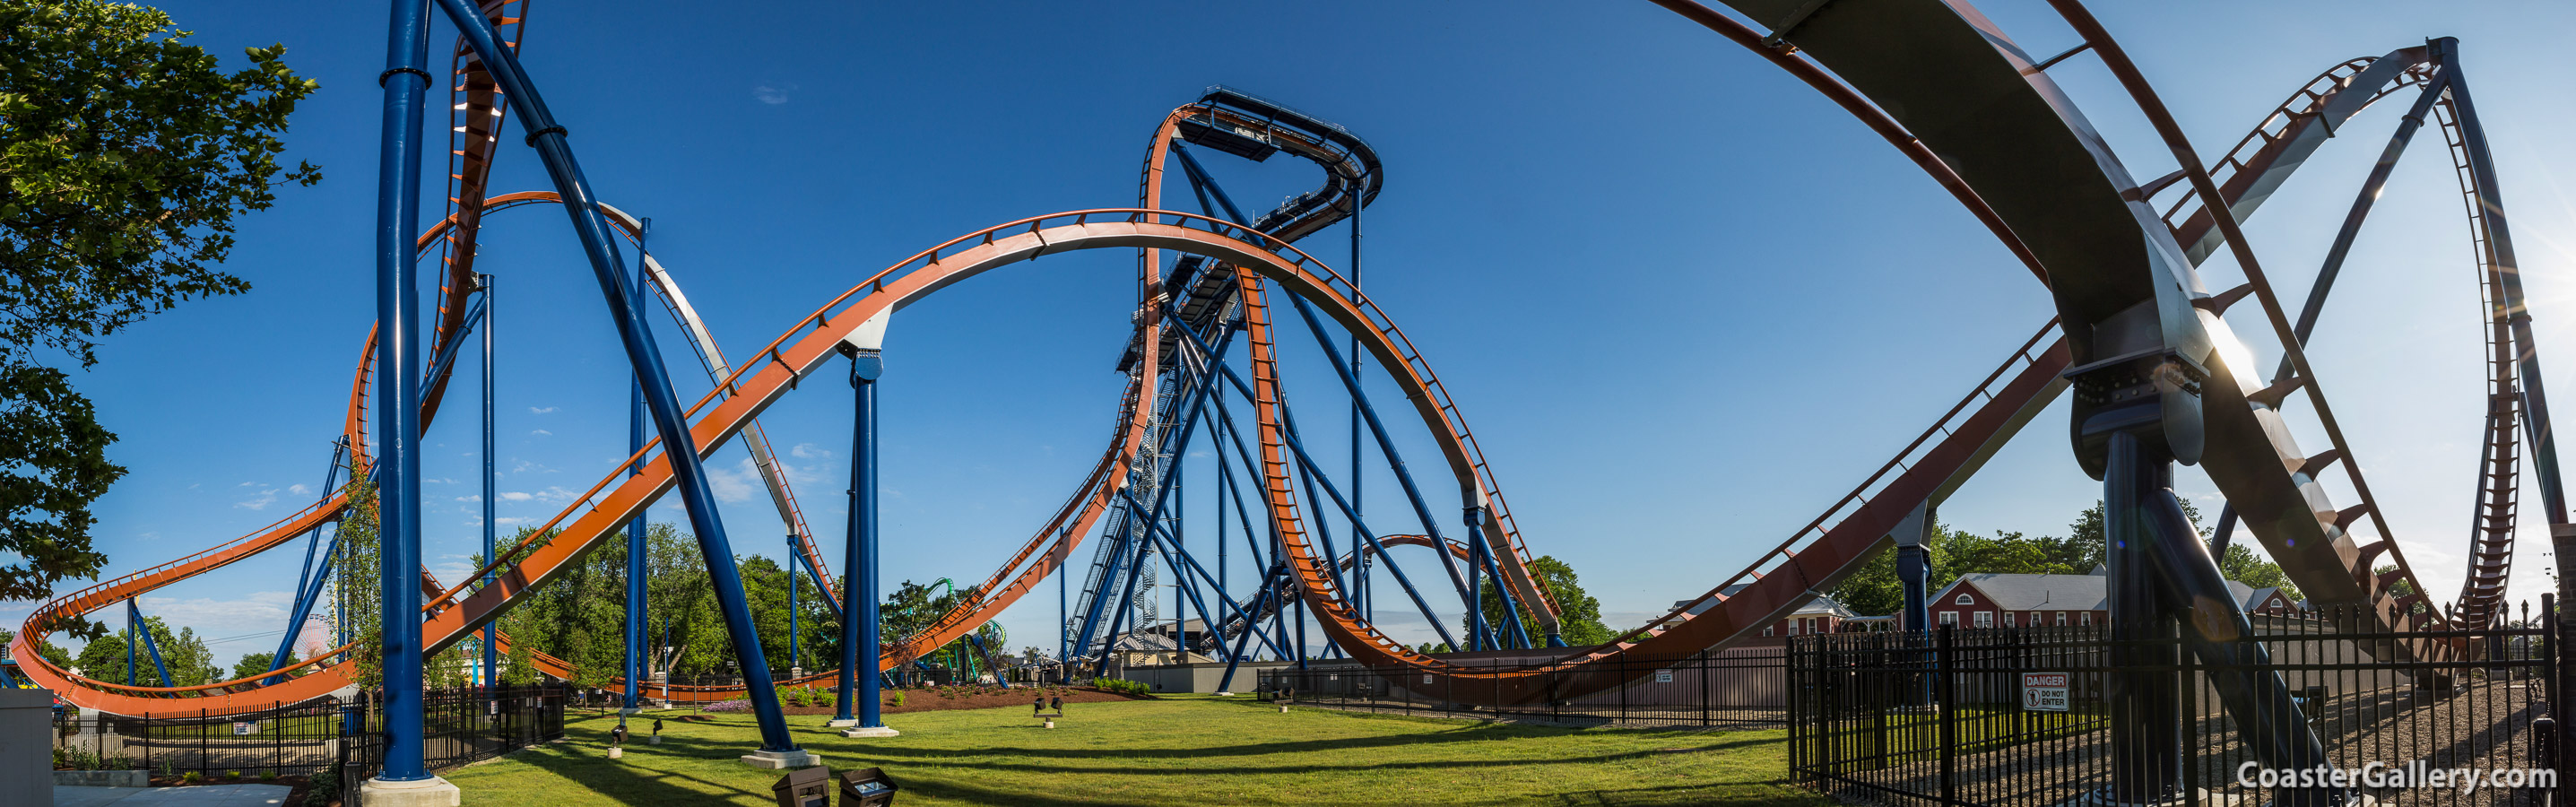 Panorama picture of the Valravn roller coaster and Cedar Point Dormitories